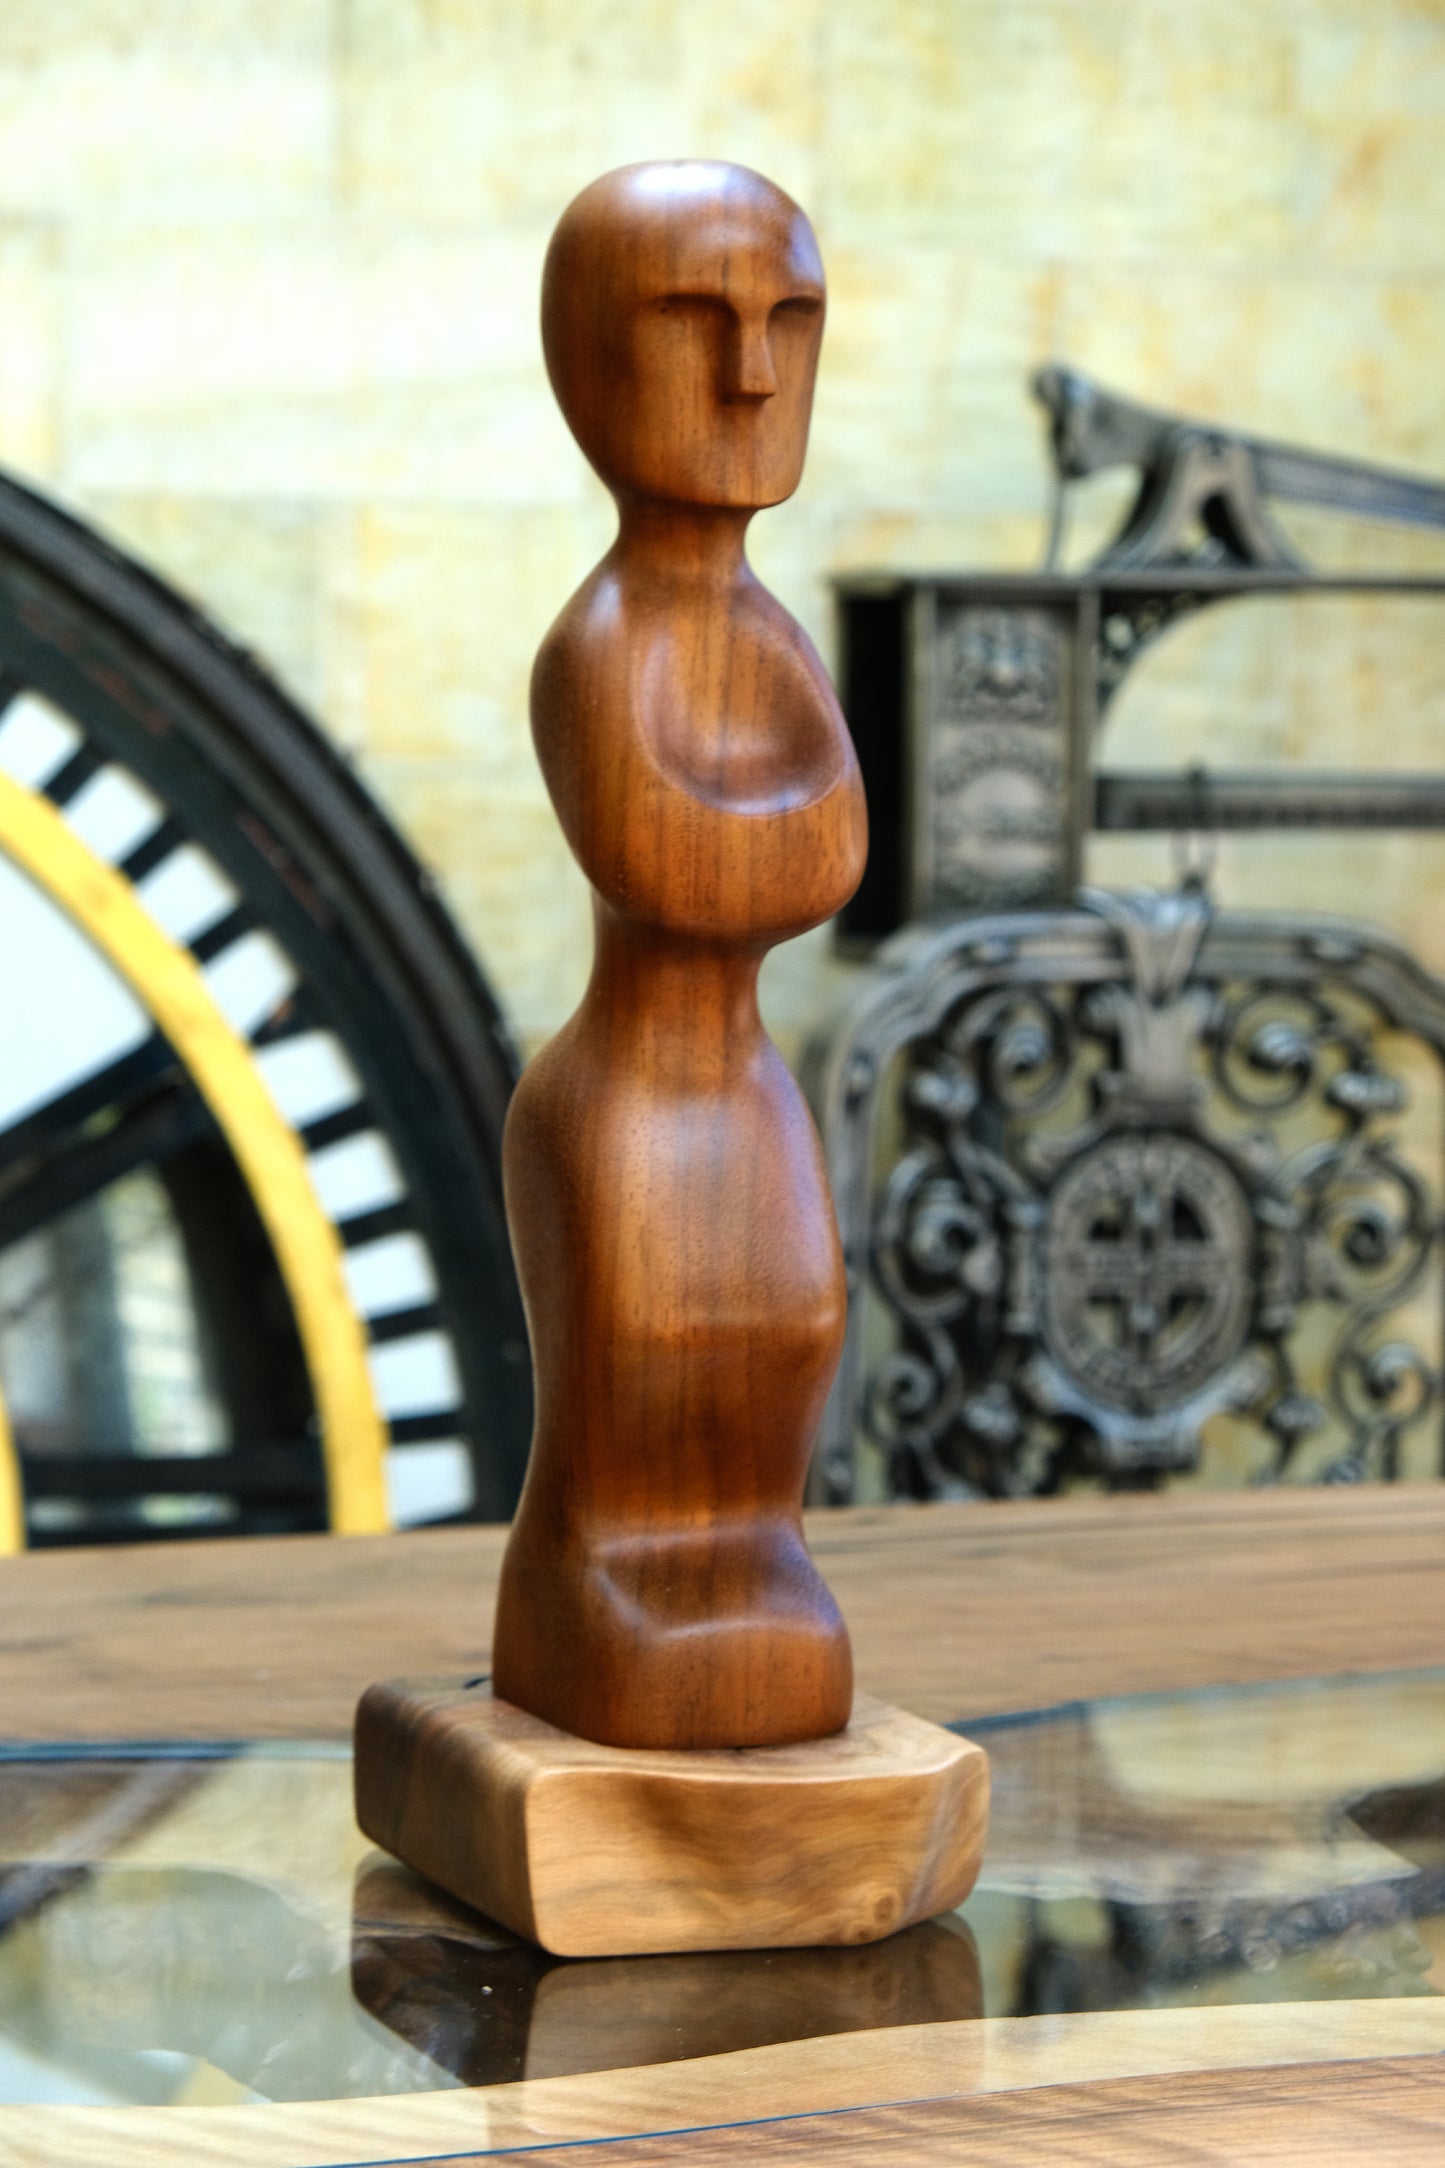 Explore the Artistry of 'Iroko Prayer' with Our Live Edge Sculpture. This enchanting wooden statue is a masterpiece, painstakingly handcrafted to grace your home with elegance. Made from the exquisite Iroko wood, renowned for its healing properties, this exceptional sculpture showcases a beautifully hand-carved wooden figurine, delicately mounted on a sleek black walnut raw edge plinth. It's a genuinely distinctive wood sculpture that imbues any space with enduring beauty.